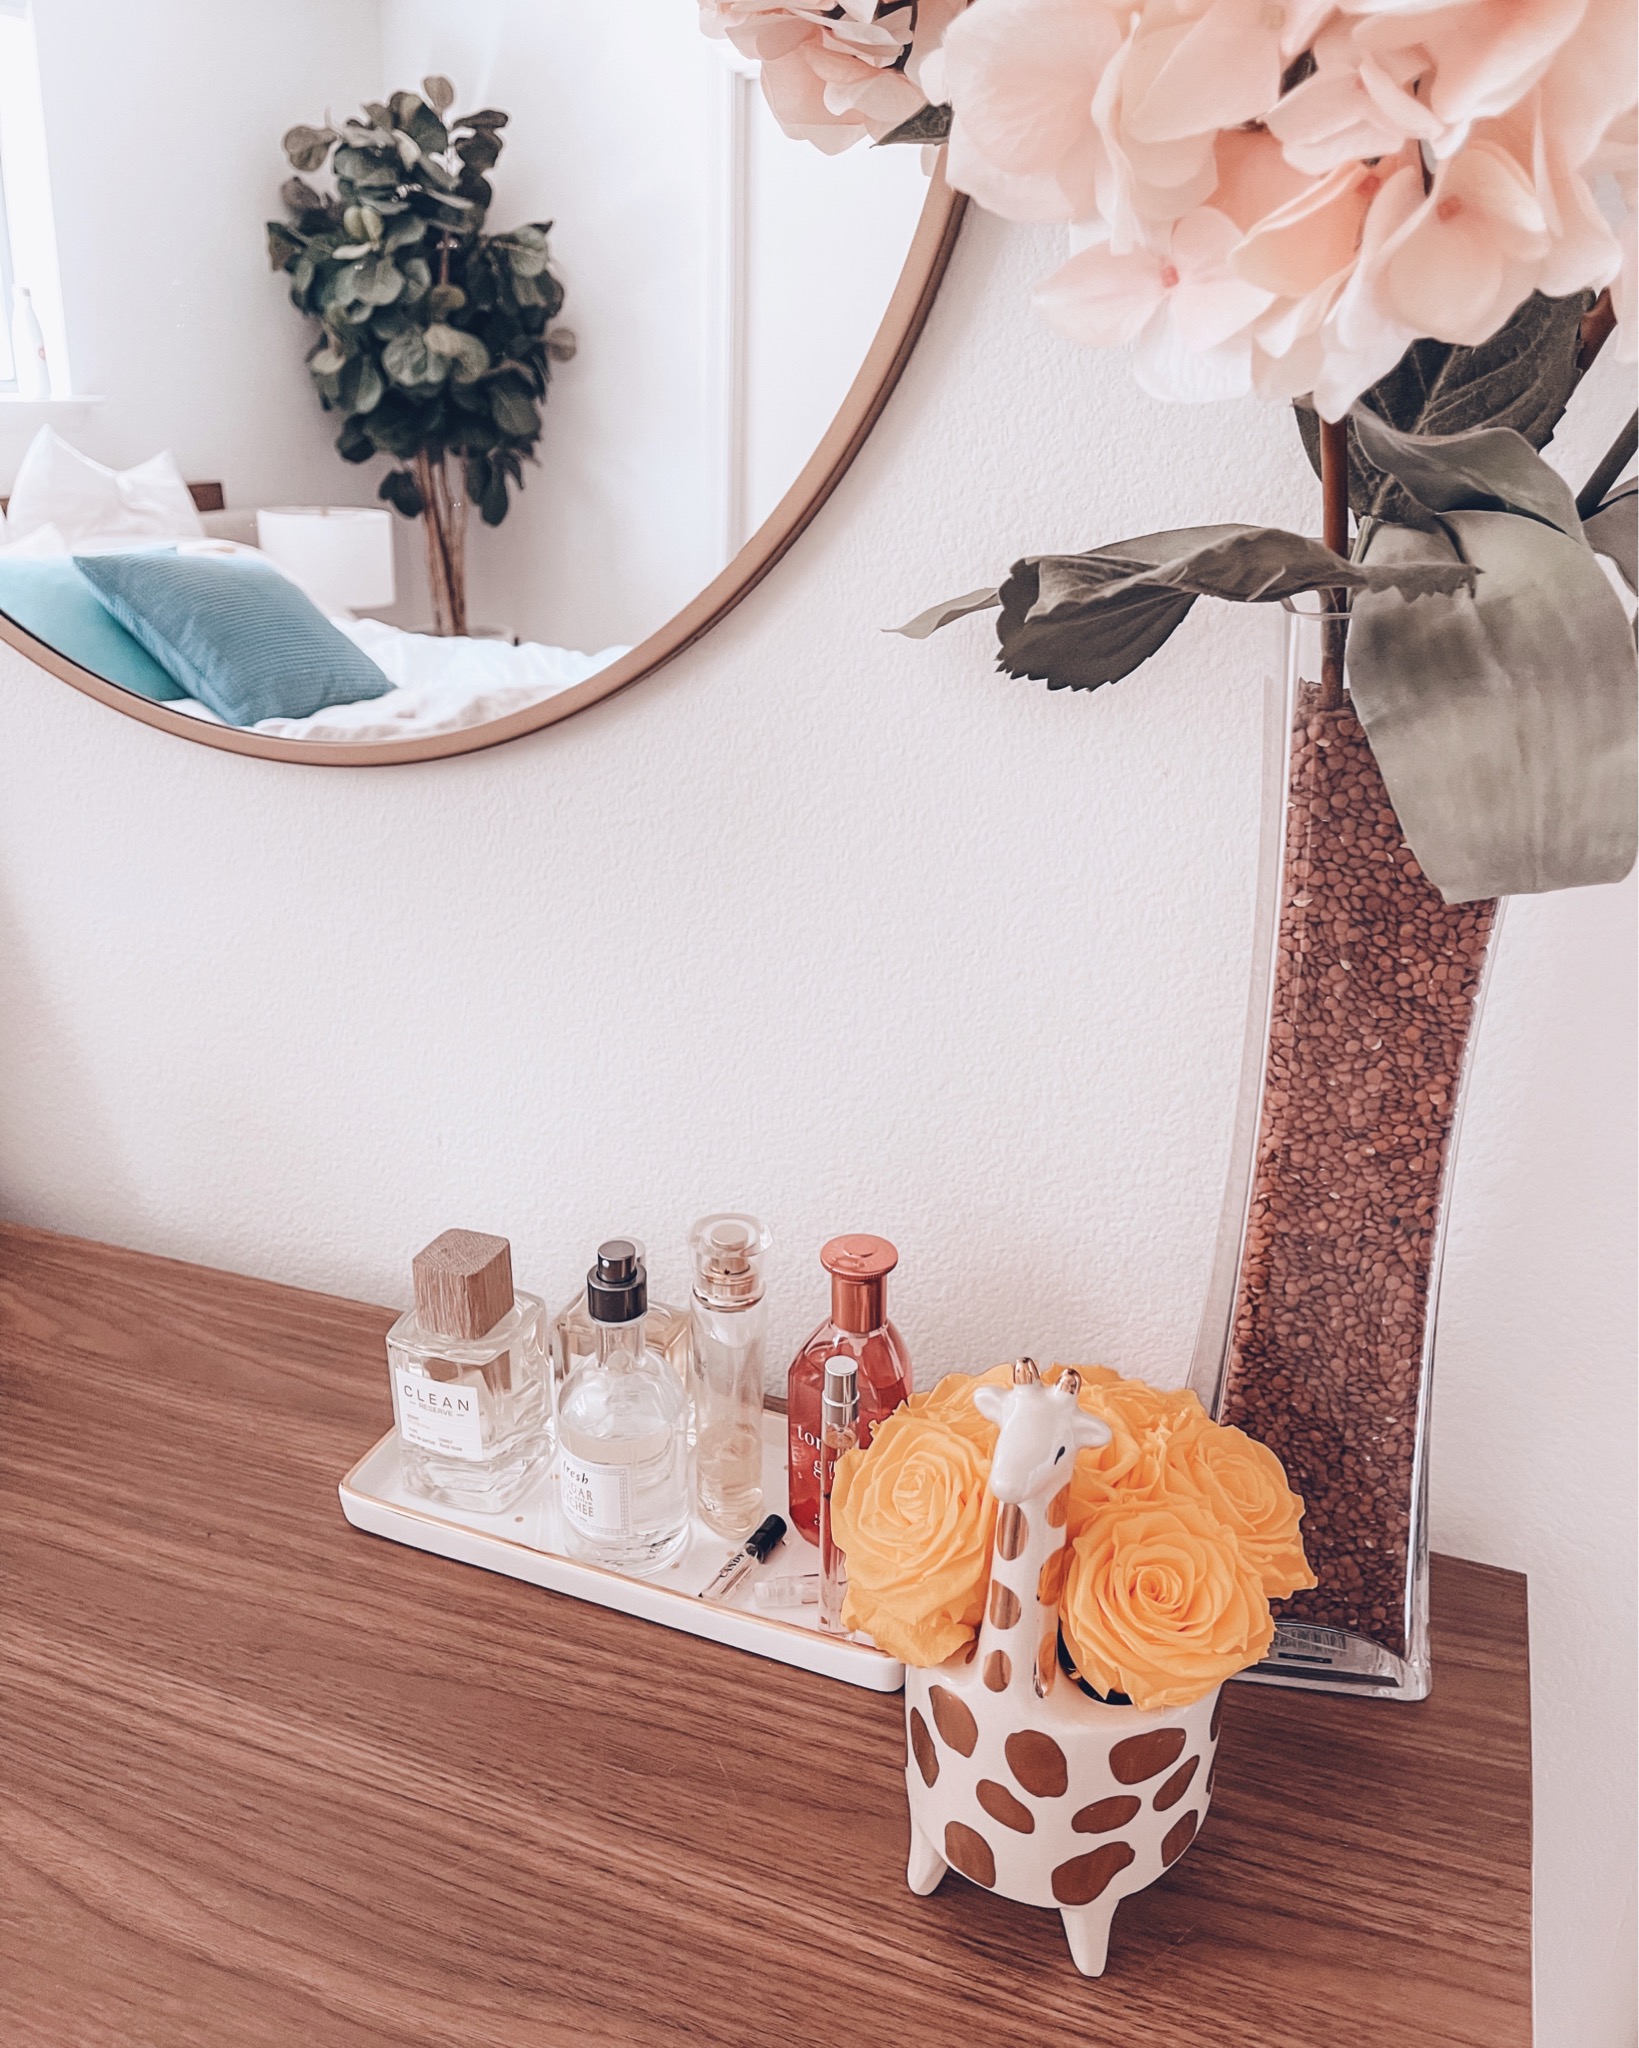 cute & little | dallas petite fashion blog | bedroom dresser decor | love always, abby flowers |Create a Home by popular Dallas life and style blog, Cute and Little: image of a round mirror, Love Always Abby preserved roses, giraffe planter, and a glass vase containing a faux hydrangea.  